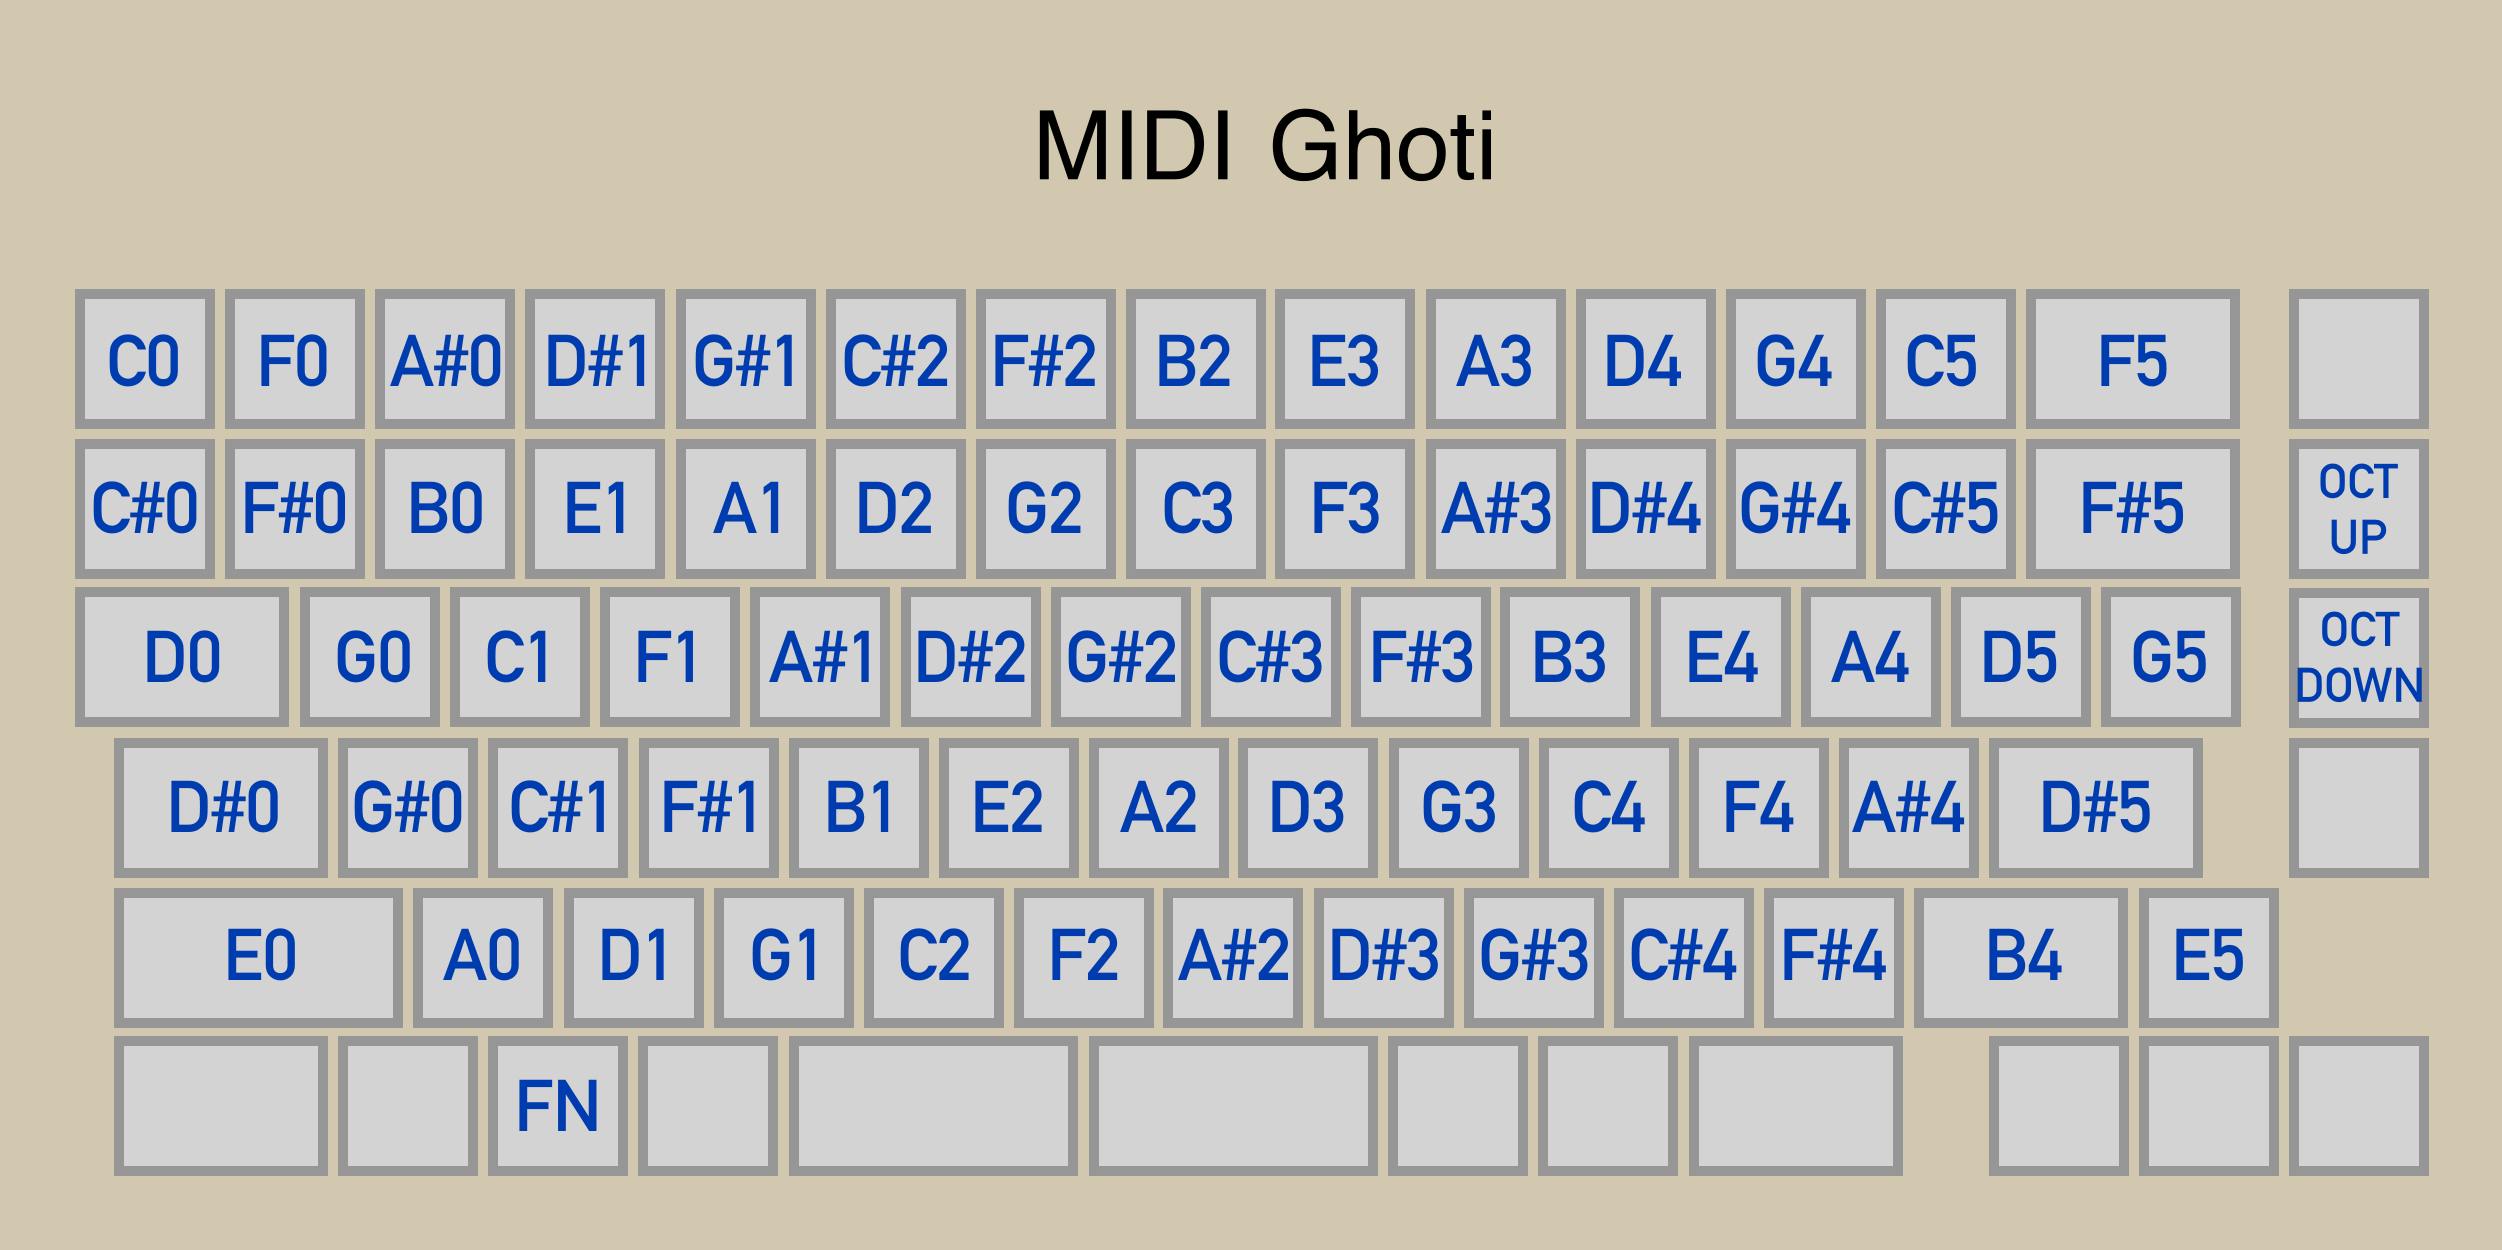 Legend showing notes laid out on the keyboard vertically in half-chromatic steps.